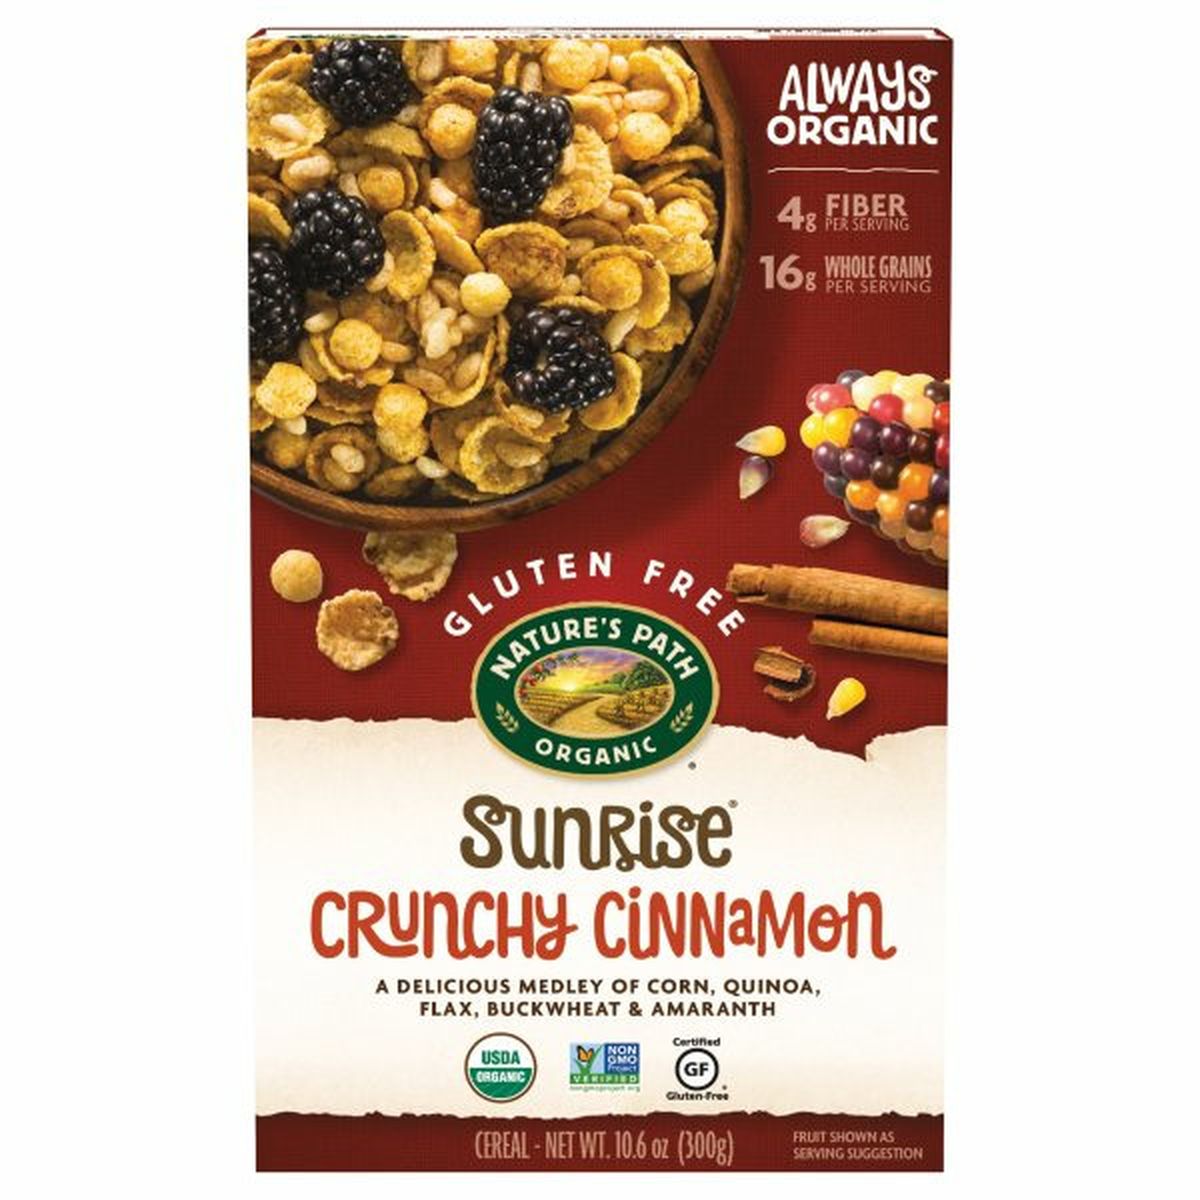 Calories in Nature's Path Cereal, Gluten Free, Crunchy Cinnamon, Sunrise